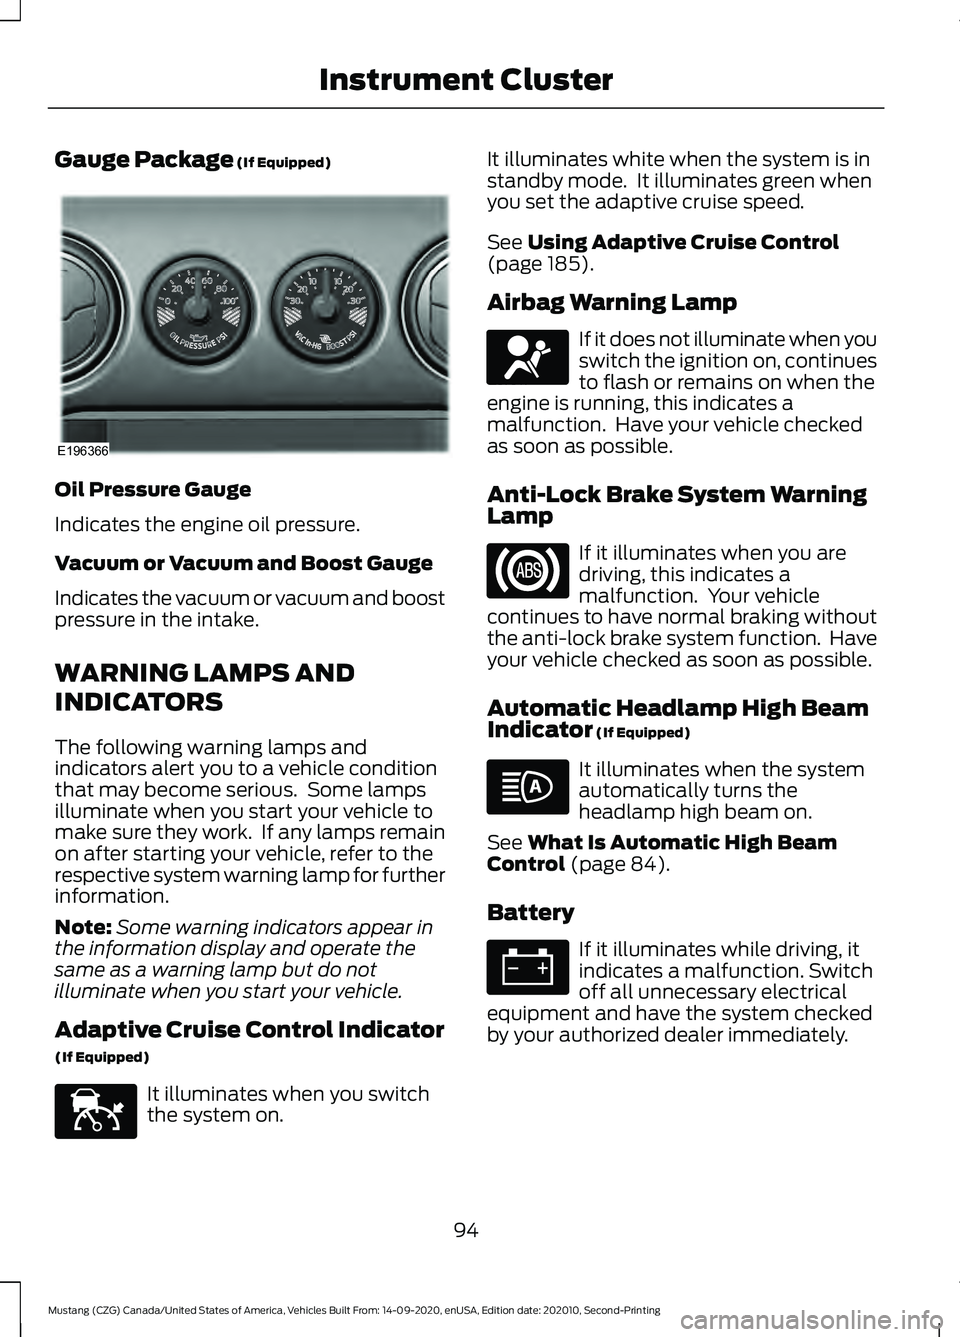 FORD MUSTANG 2021  Owners Manual Gauge Package (If Equipped)
Oil Pressure Gauge
Indicates the engine oil pressure.
Vacuum or Vacuum and Boost Gauge
Indicates the vacuum or vacuum and boost
pressure in the intake.
WARNING LAMPS AND
IN